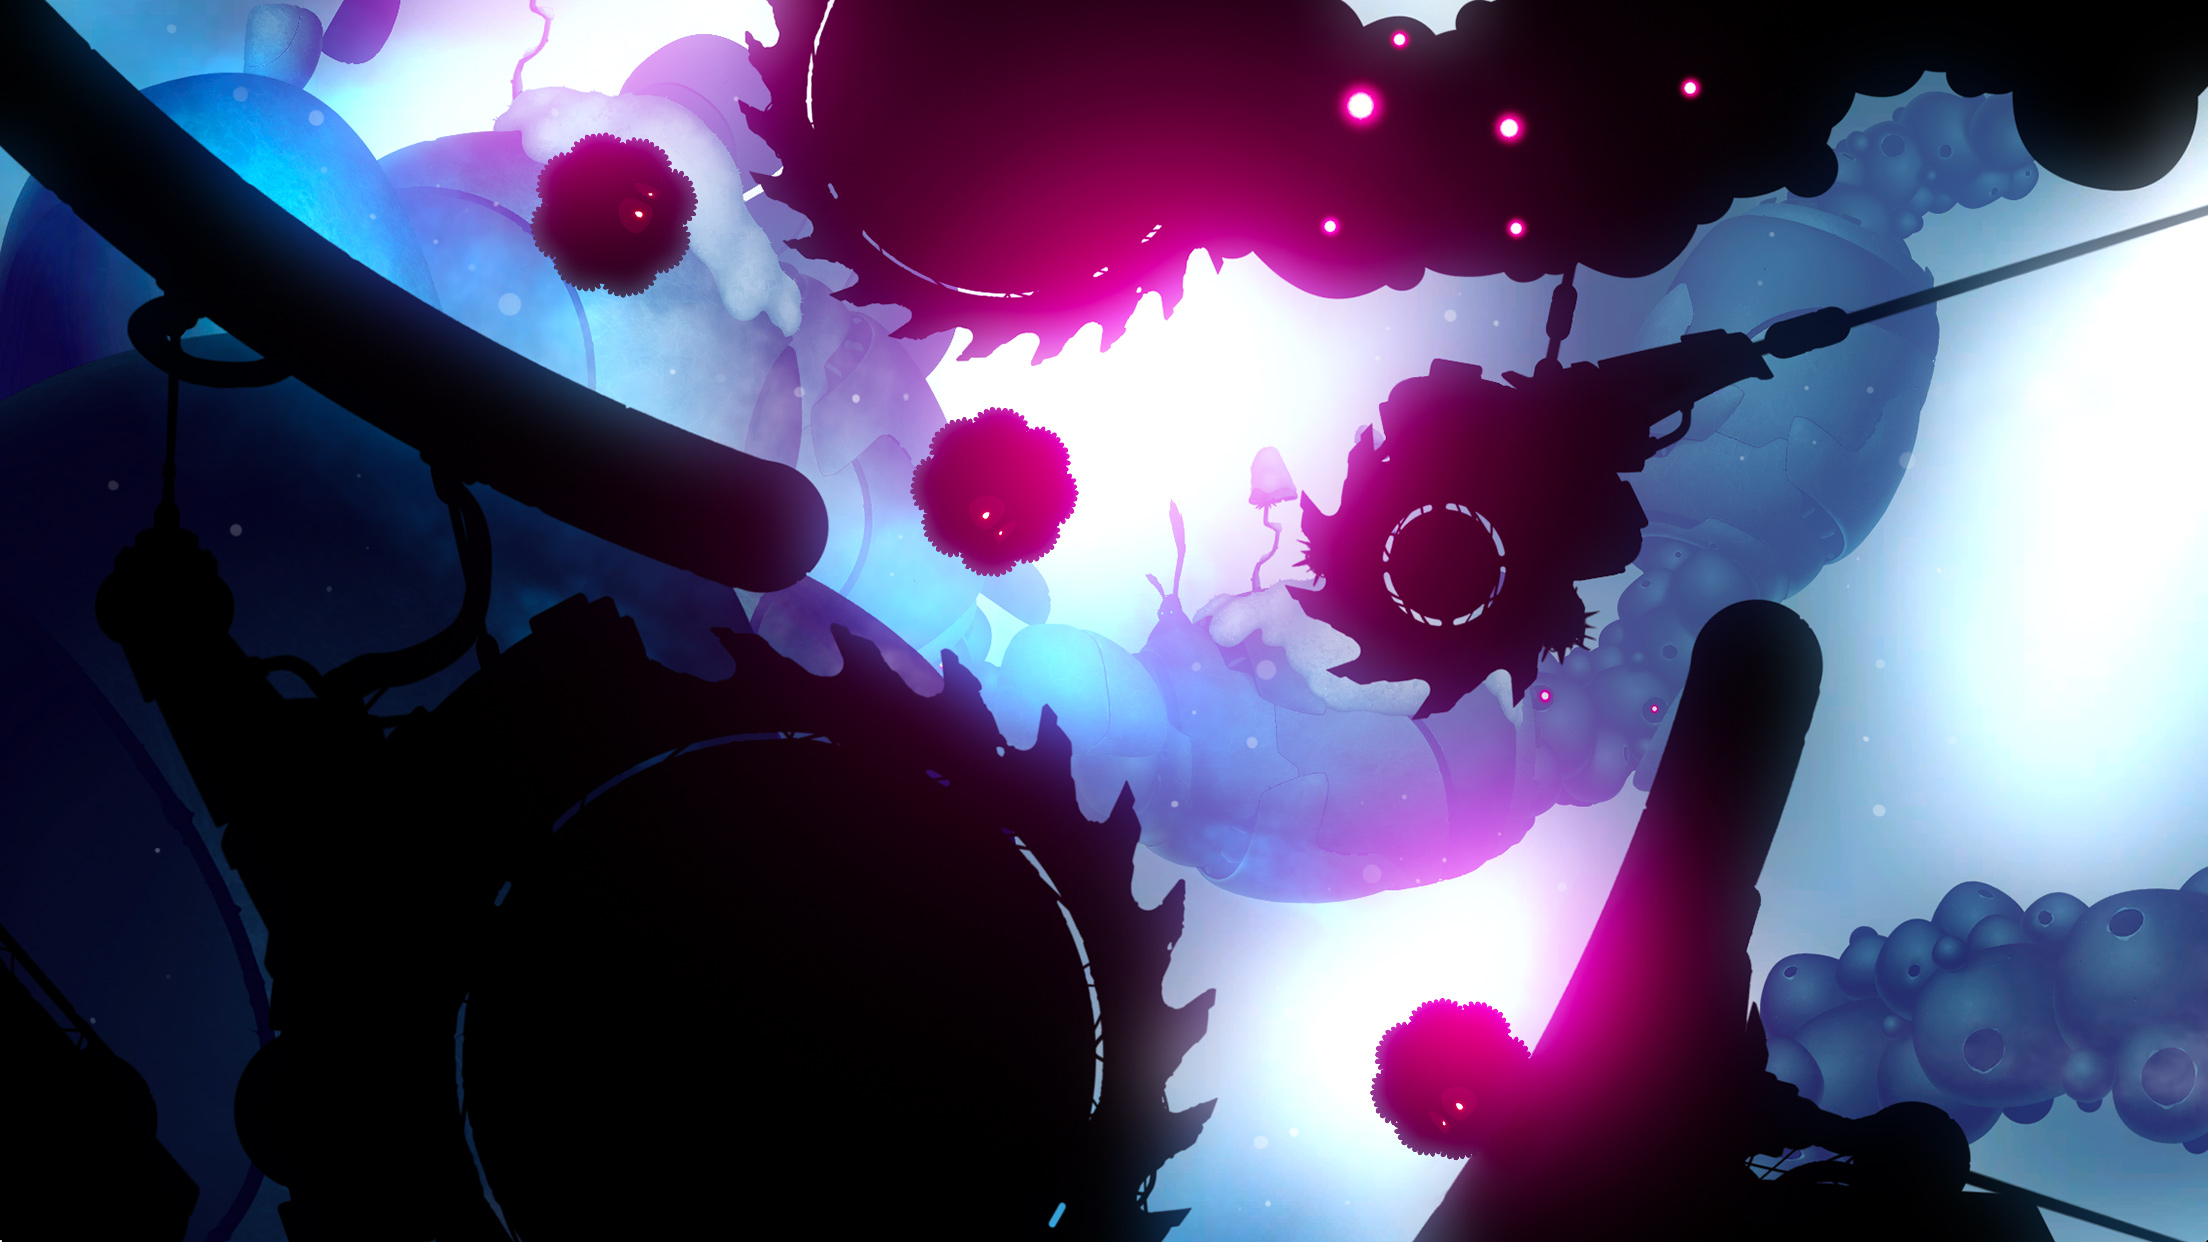 Badland 2 Is Out!